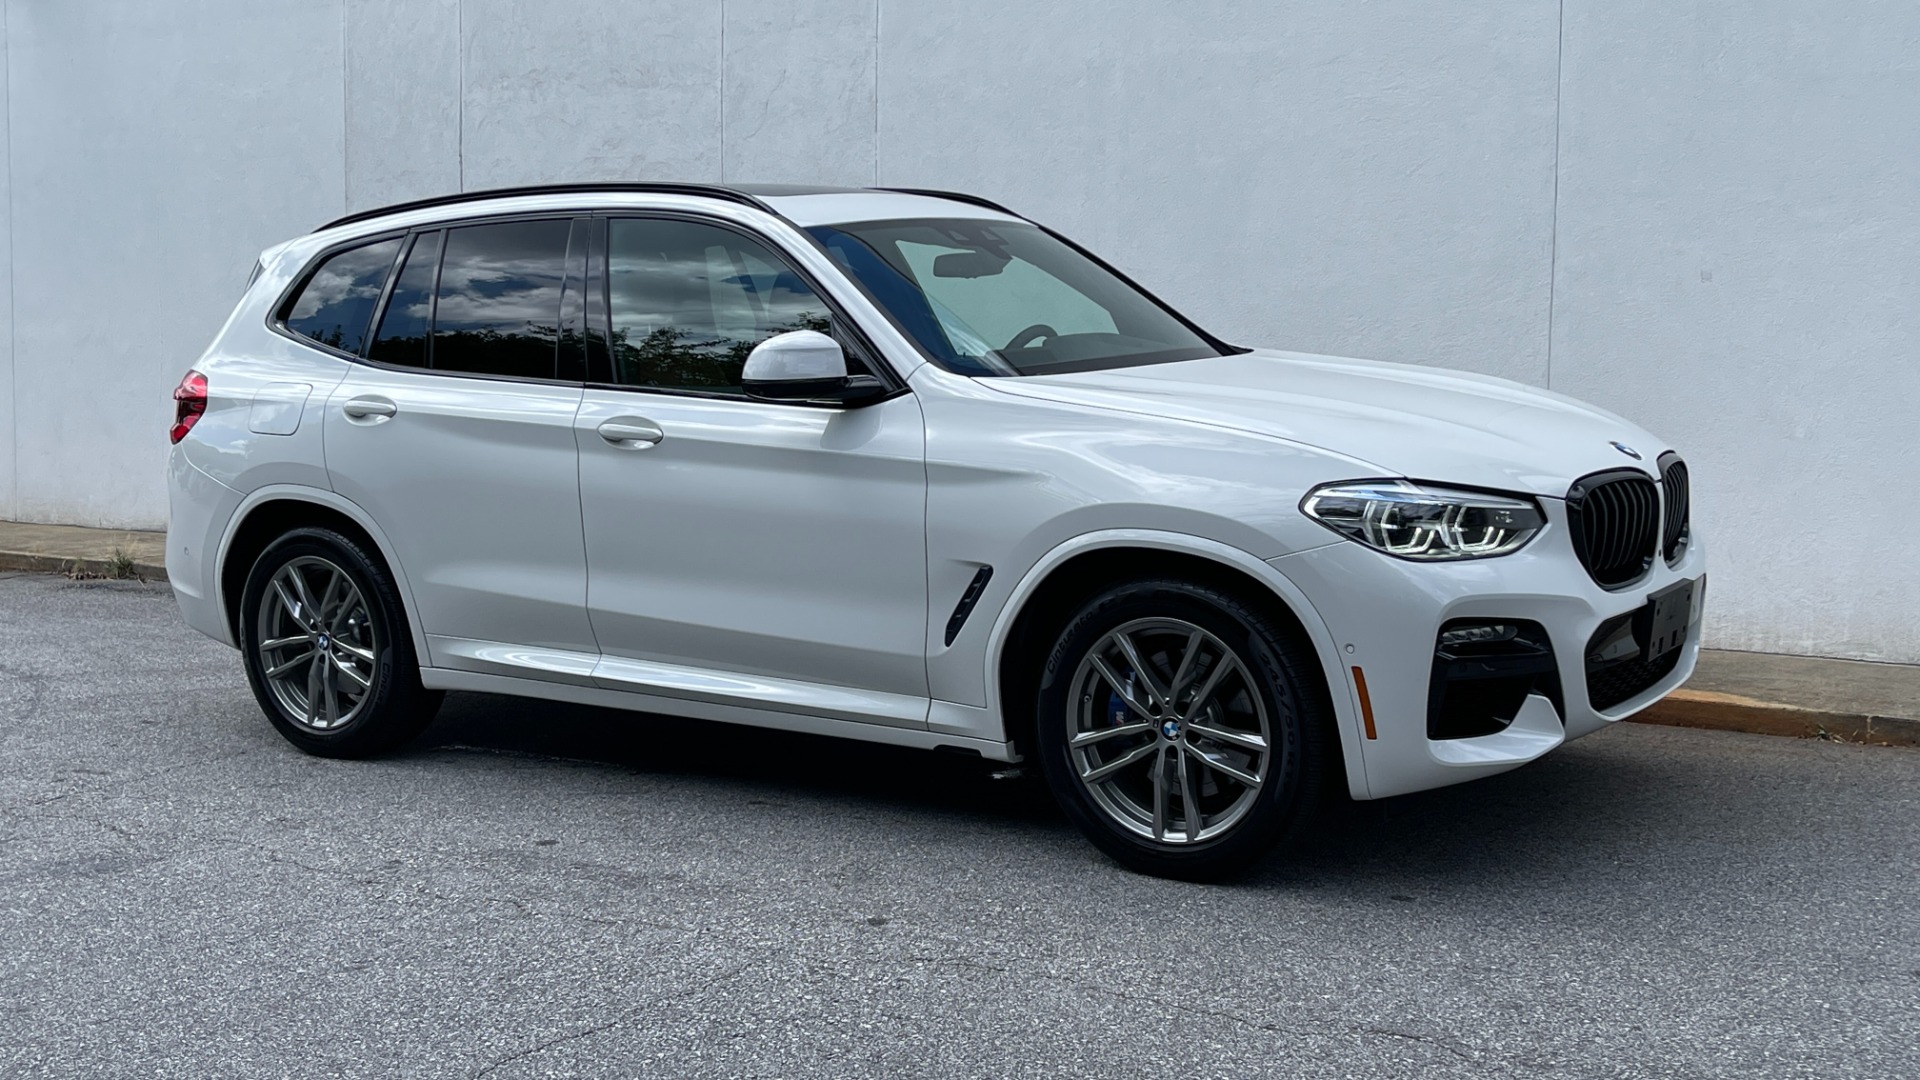 Used 2021 BMW X3 M40i / EXECUTIVE PACKAGE / SHADOWLINE TRIM / HEADS UP DISPLAY / AMBIENT LIG for sale $57,392 at Formula Imports in Charlotte NC 28227 2